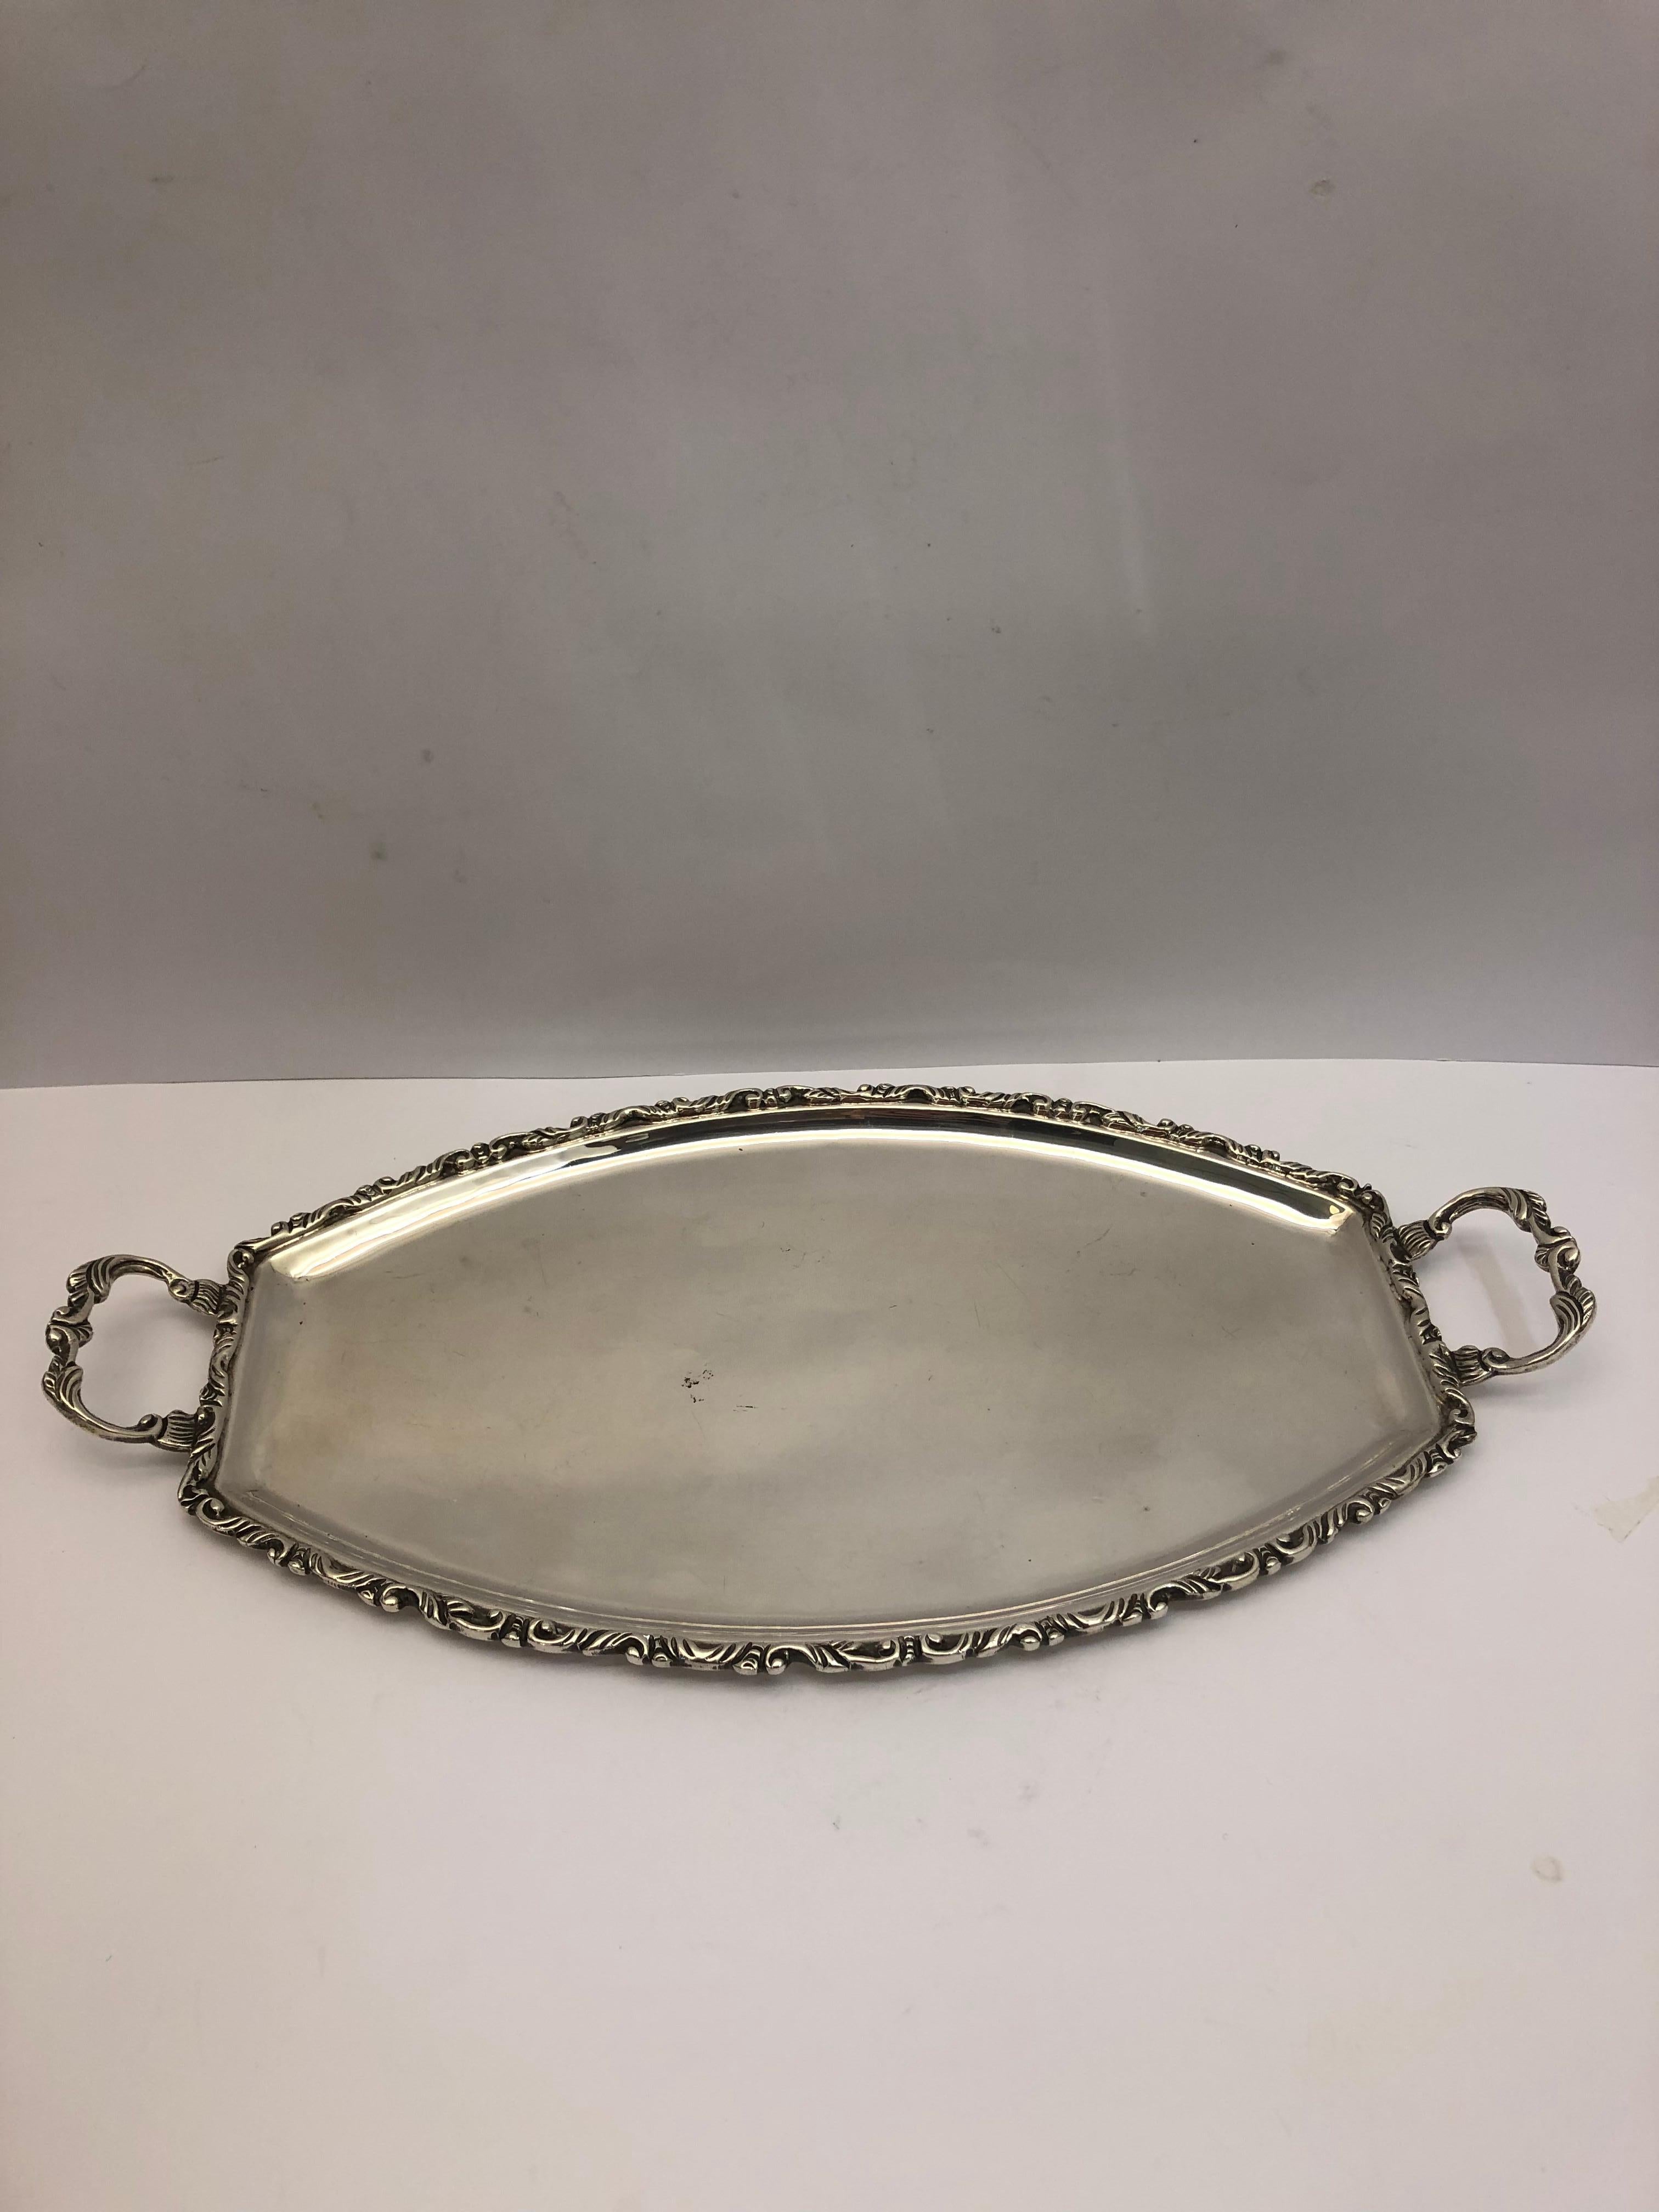 Two-handled silver tray with decorated border & handles, hallmarked 925 silver. Made in Mexico.